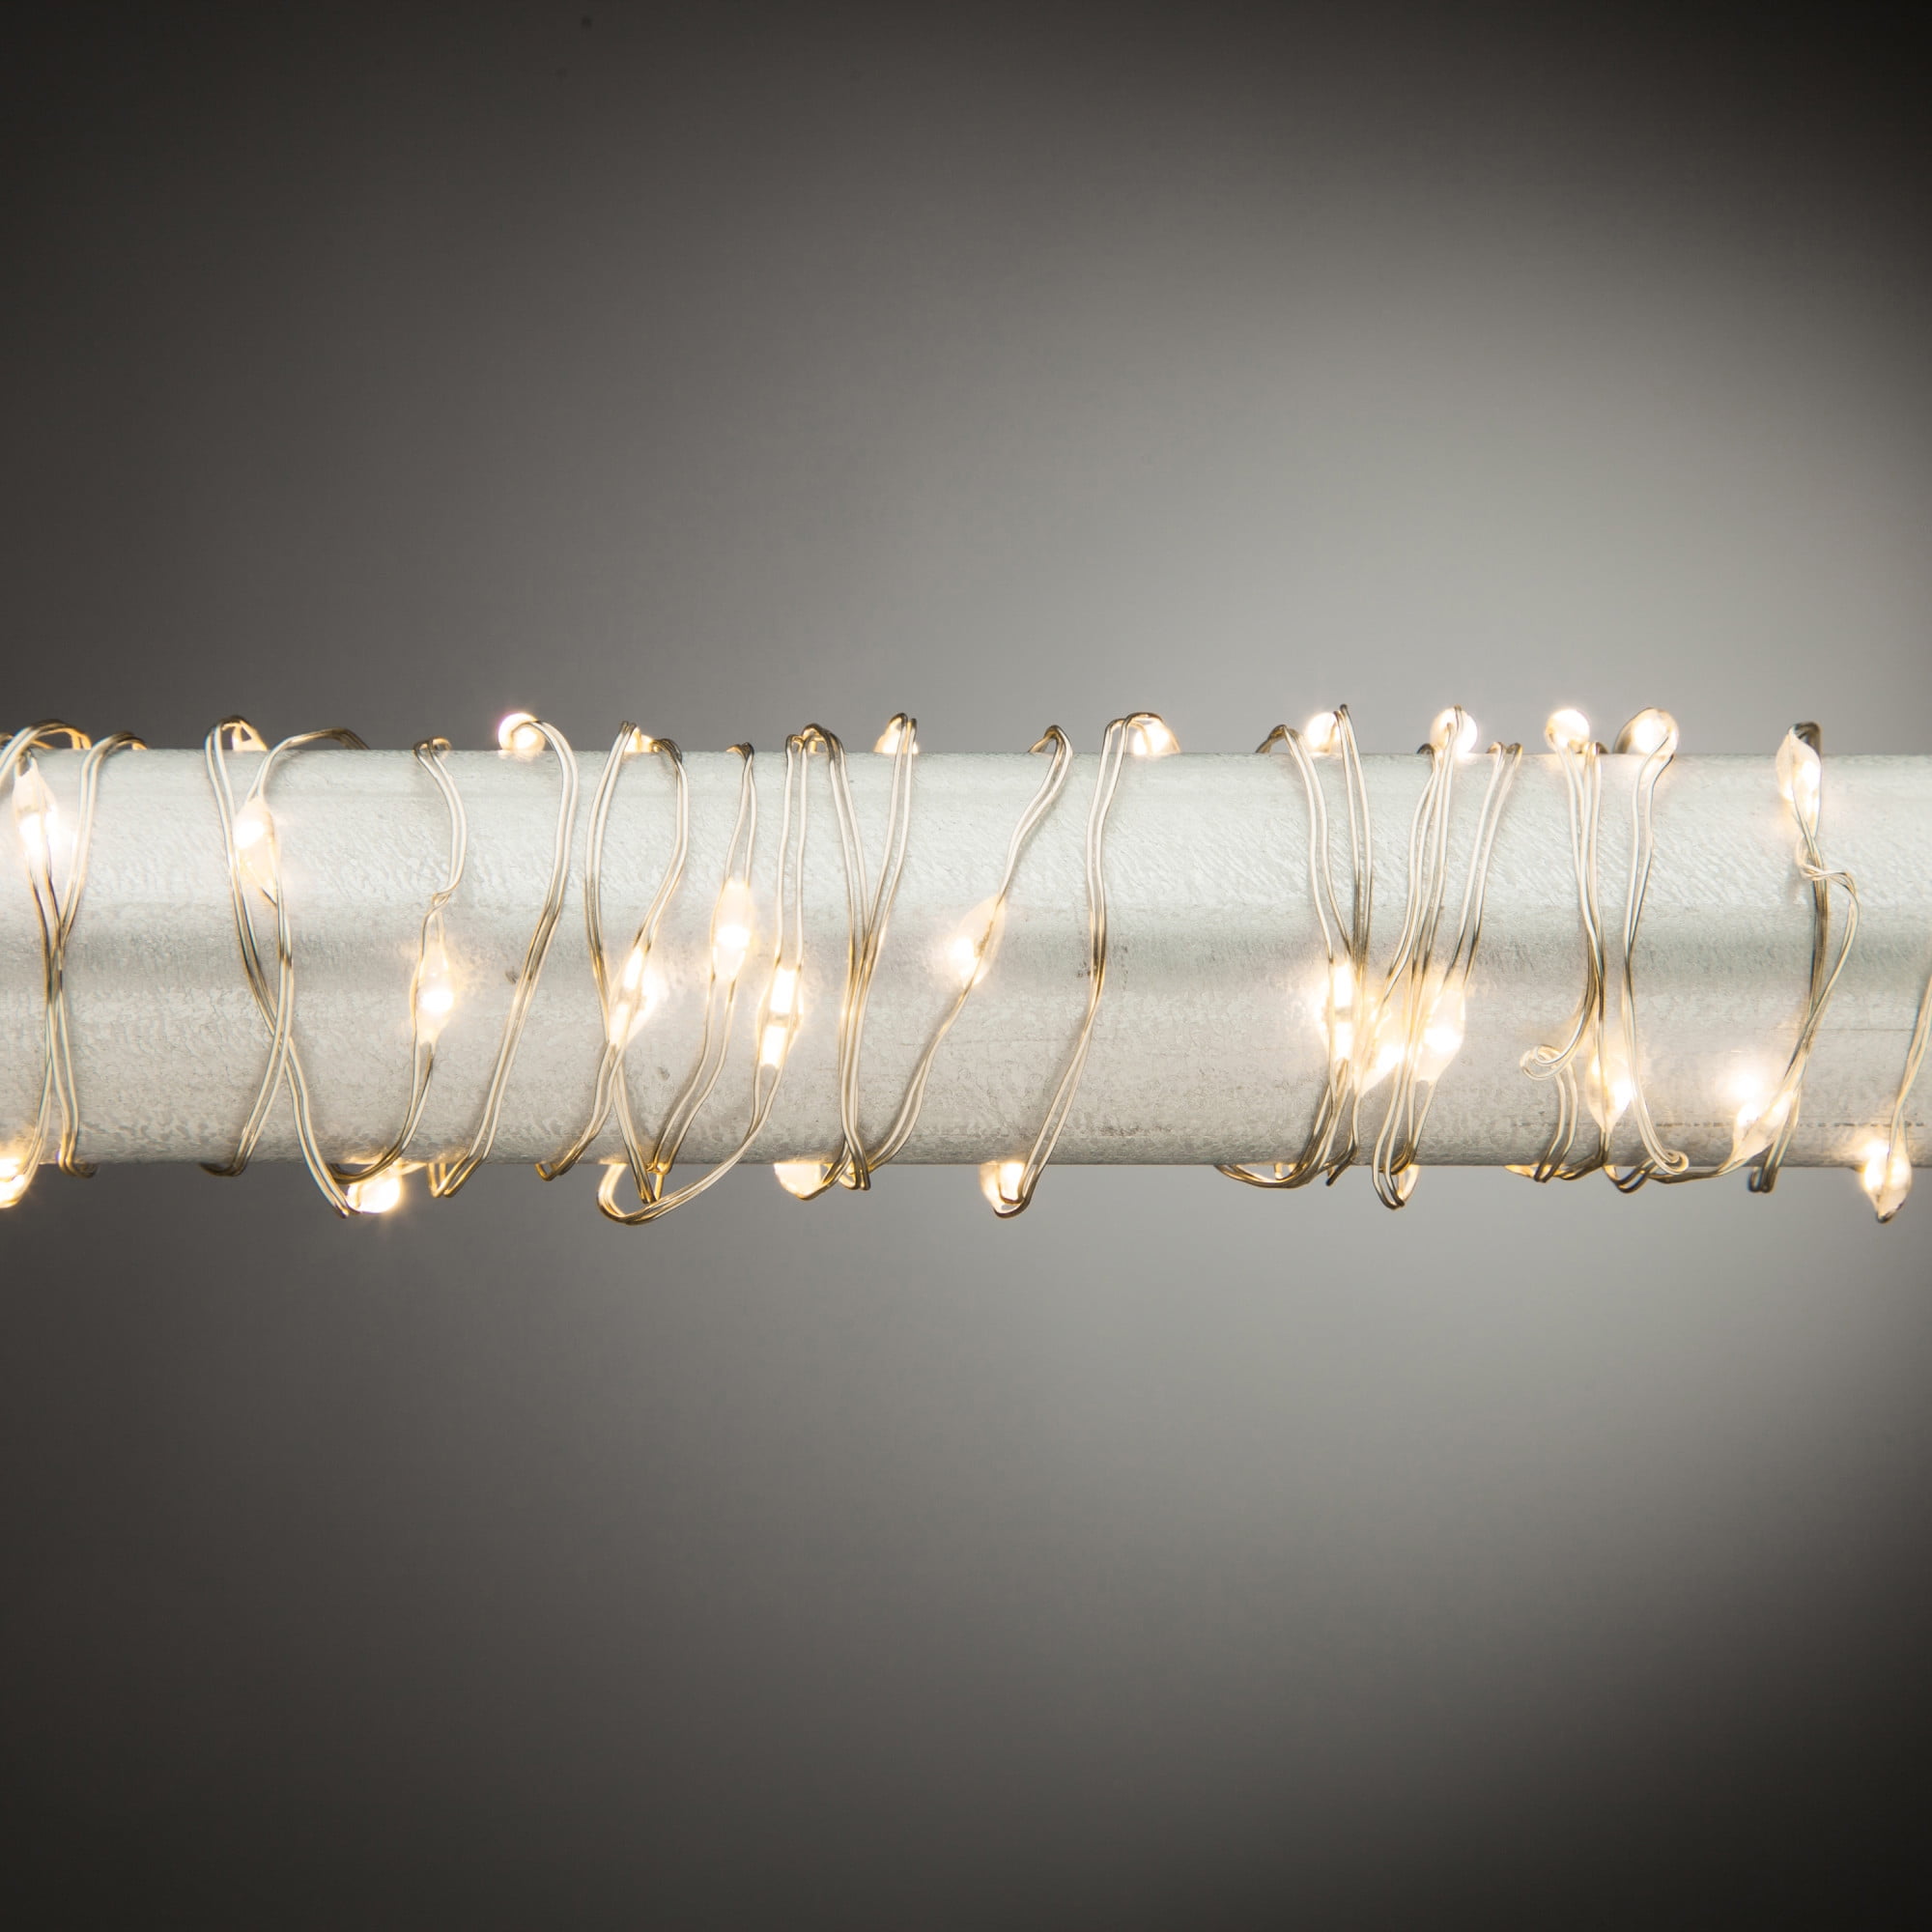 Details about   LED Light String Battery Operated Silver Wire In/Outdoor w/Timer Warm White 20ft 